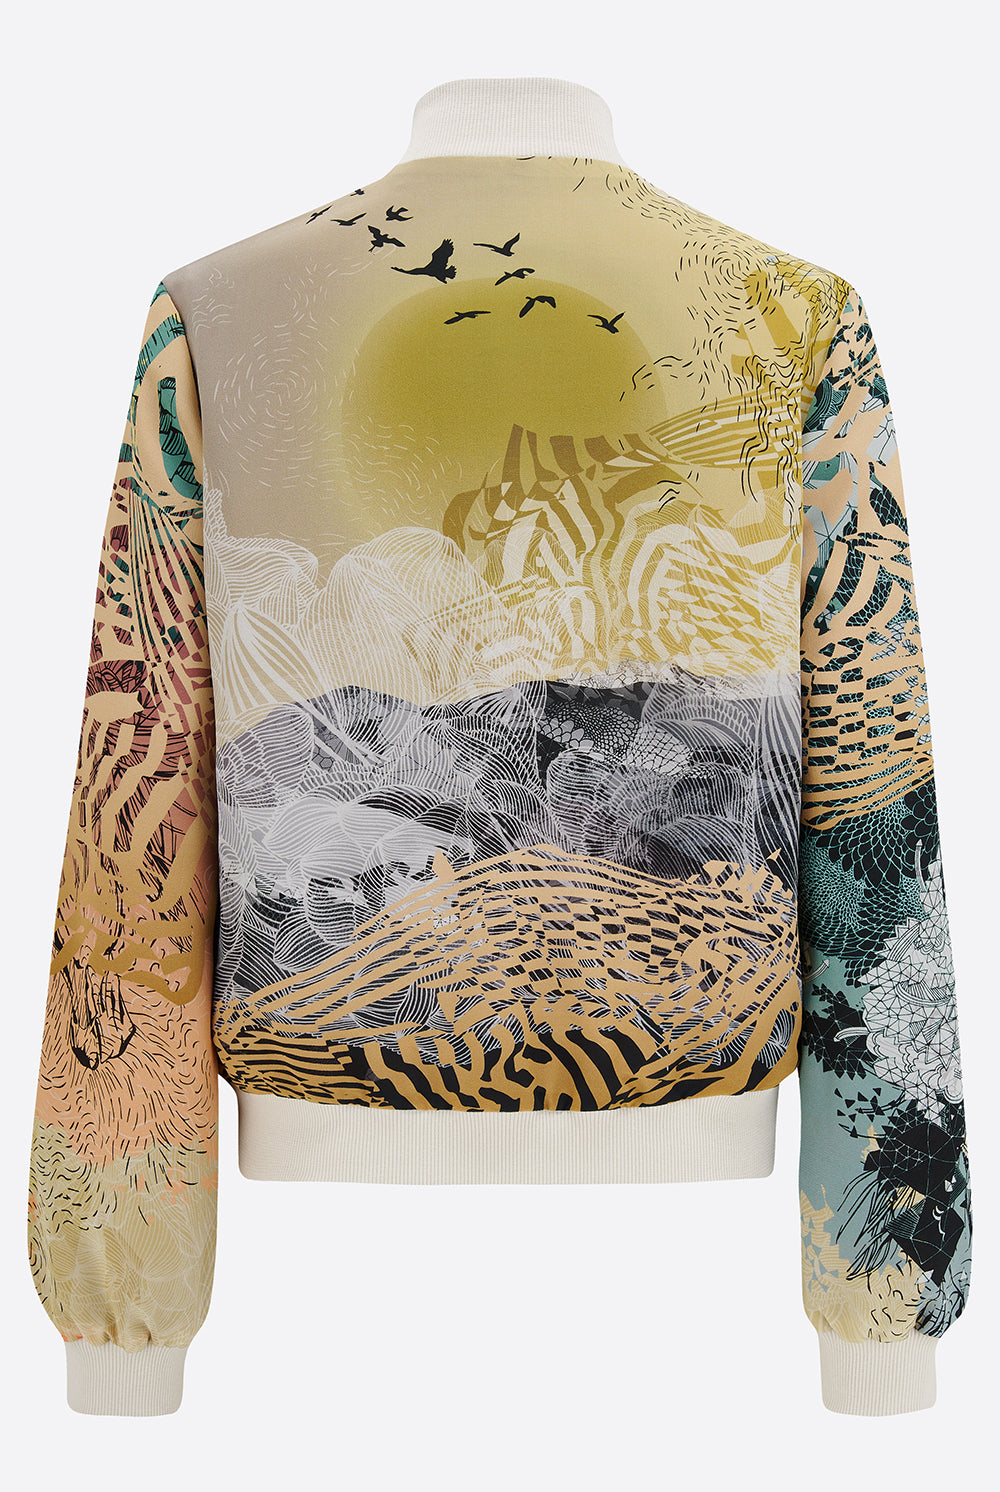 Back of silk bomber jacket in muted yellows and greens with a mountain landscape and sunrise design